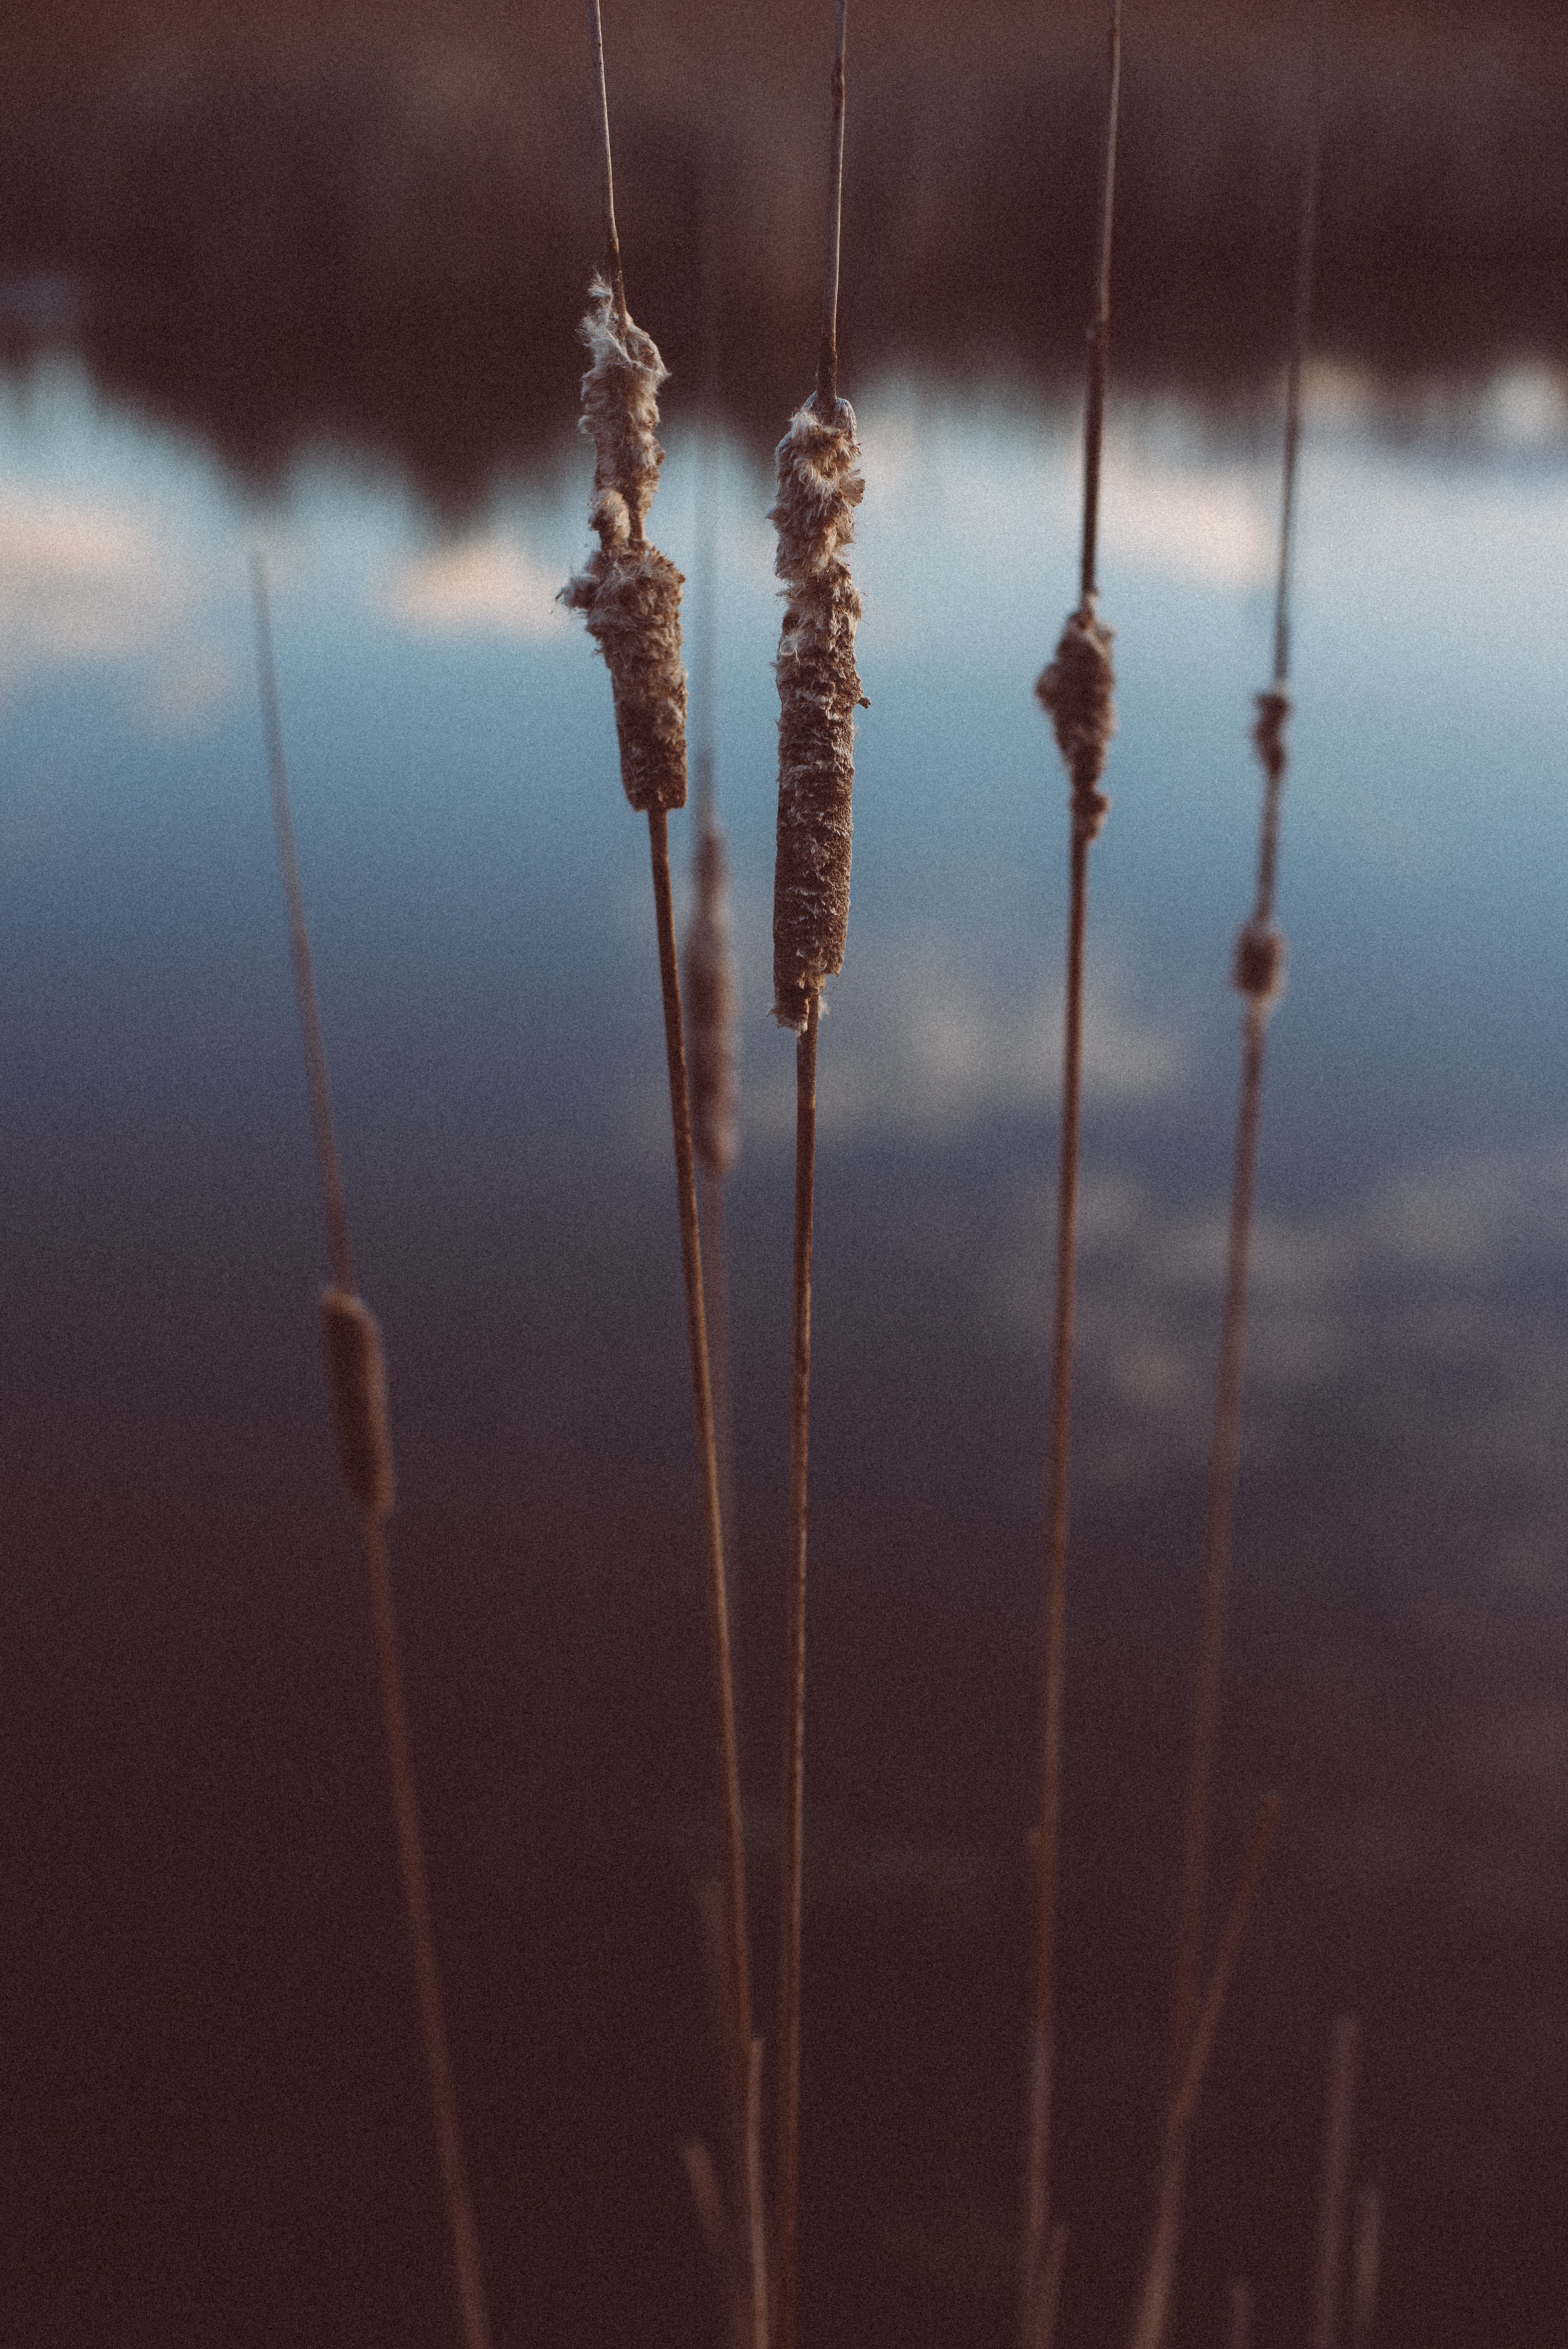 android nature, plant, evening, cane, reed